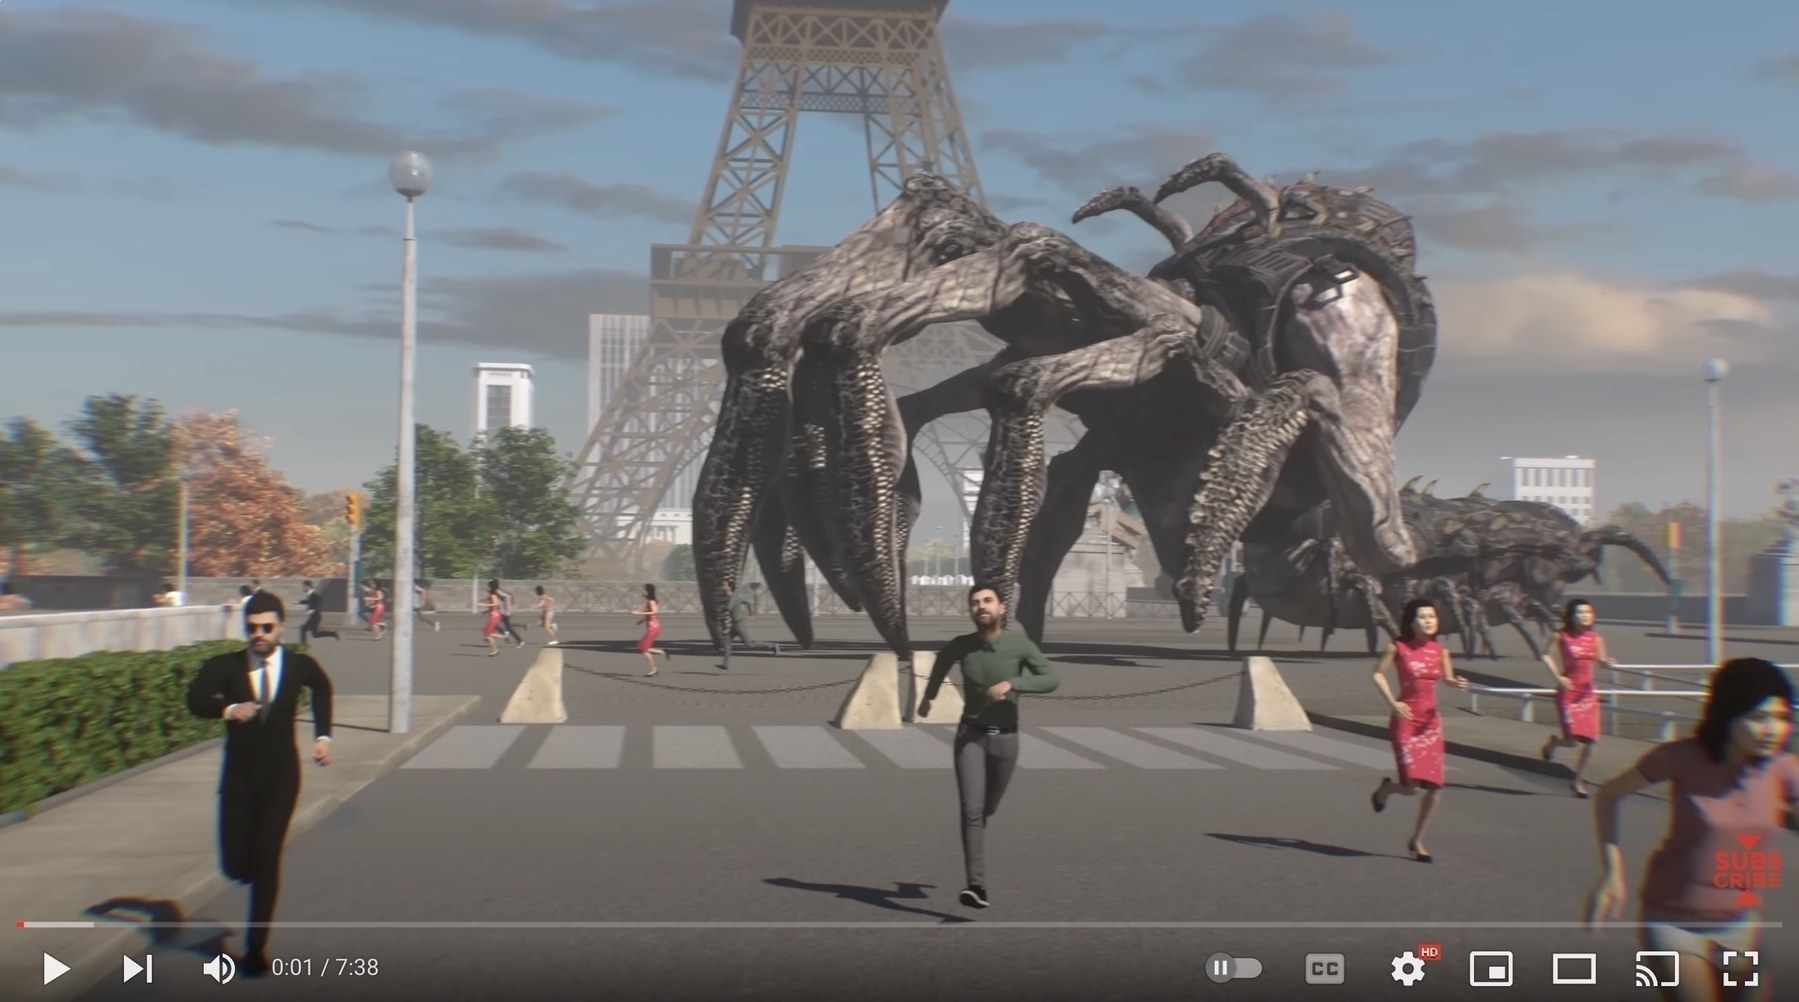 A monster chasing people in front of the Eiffel Tower